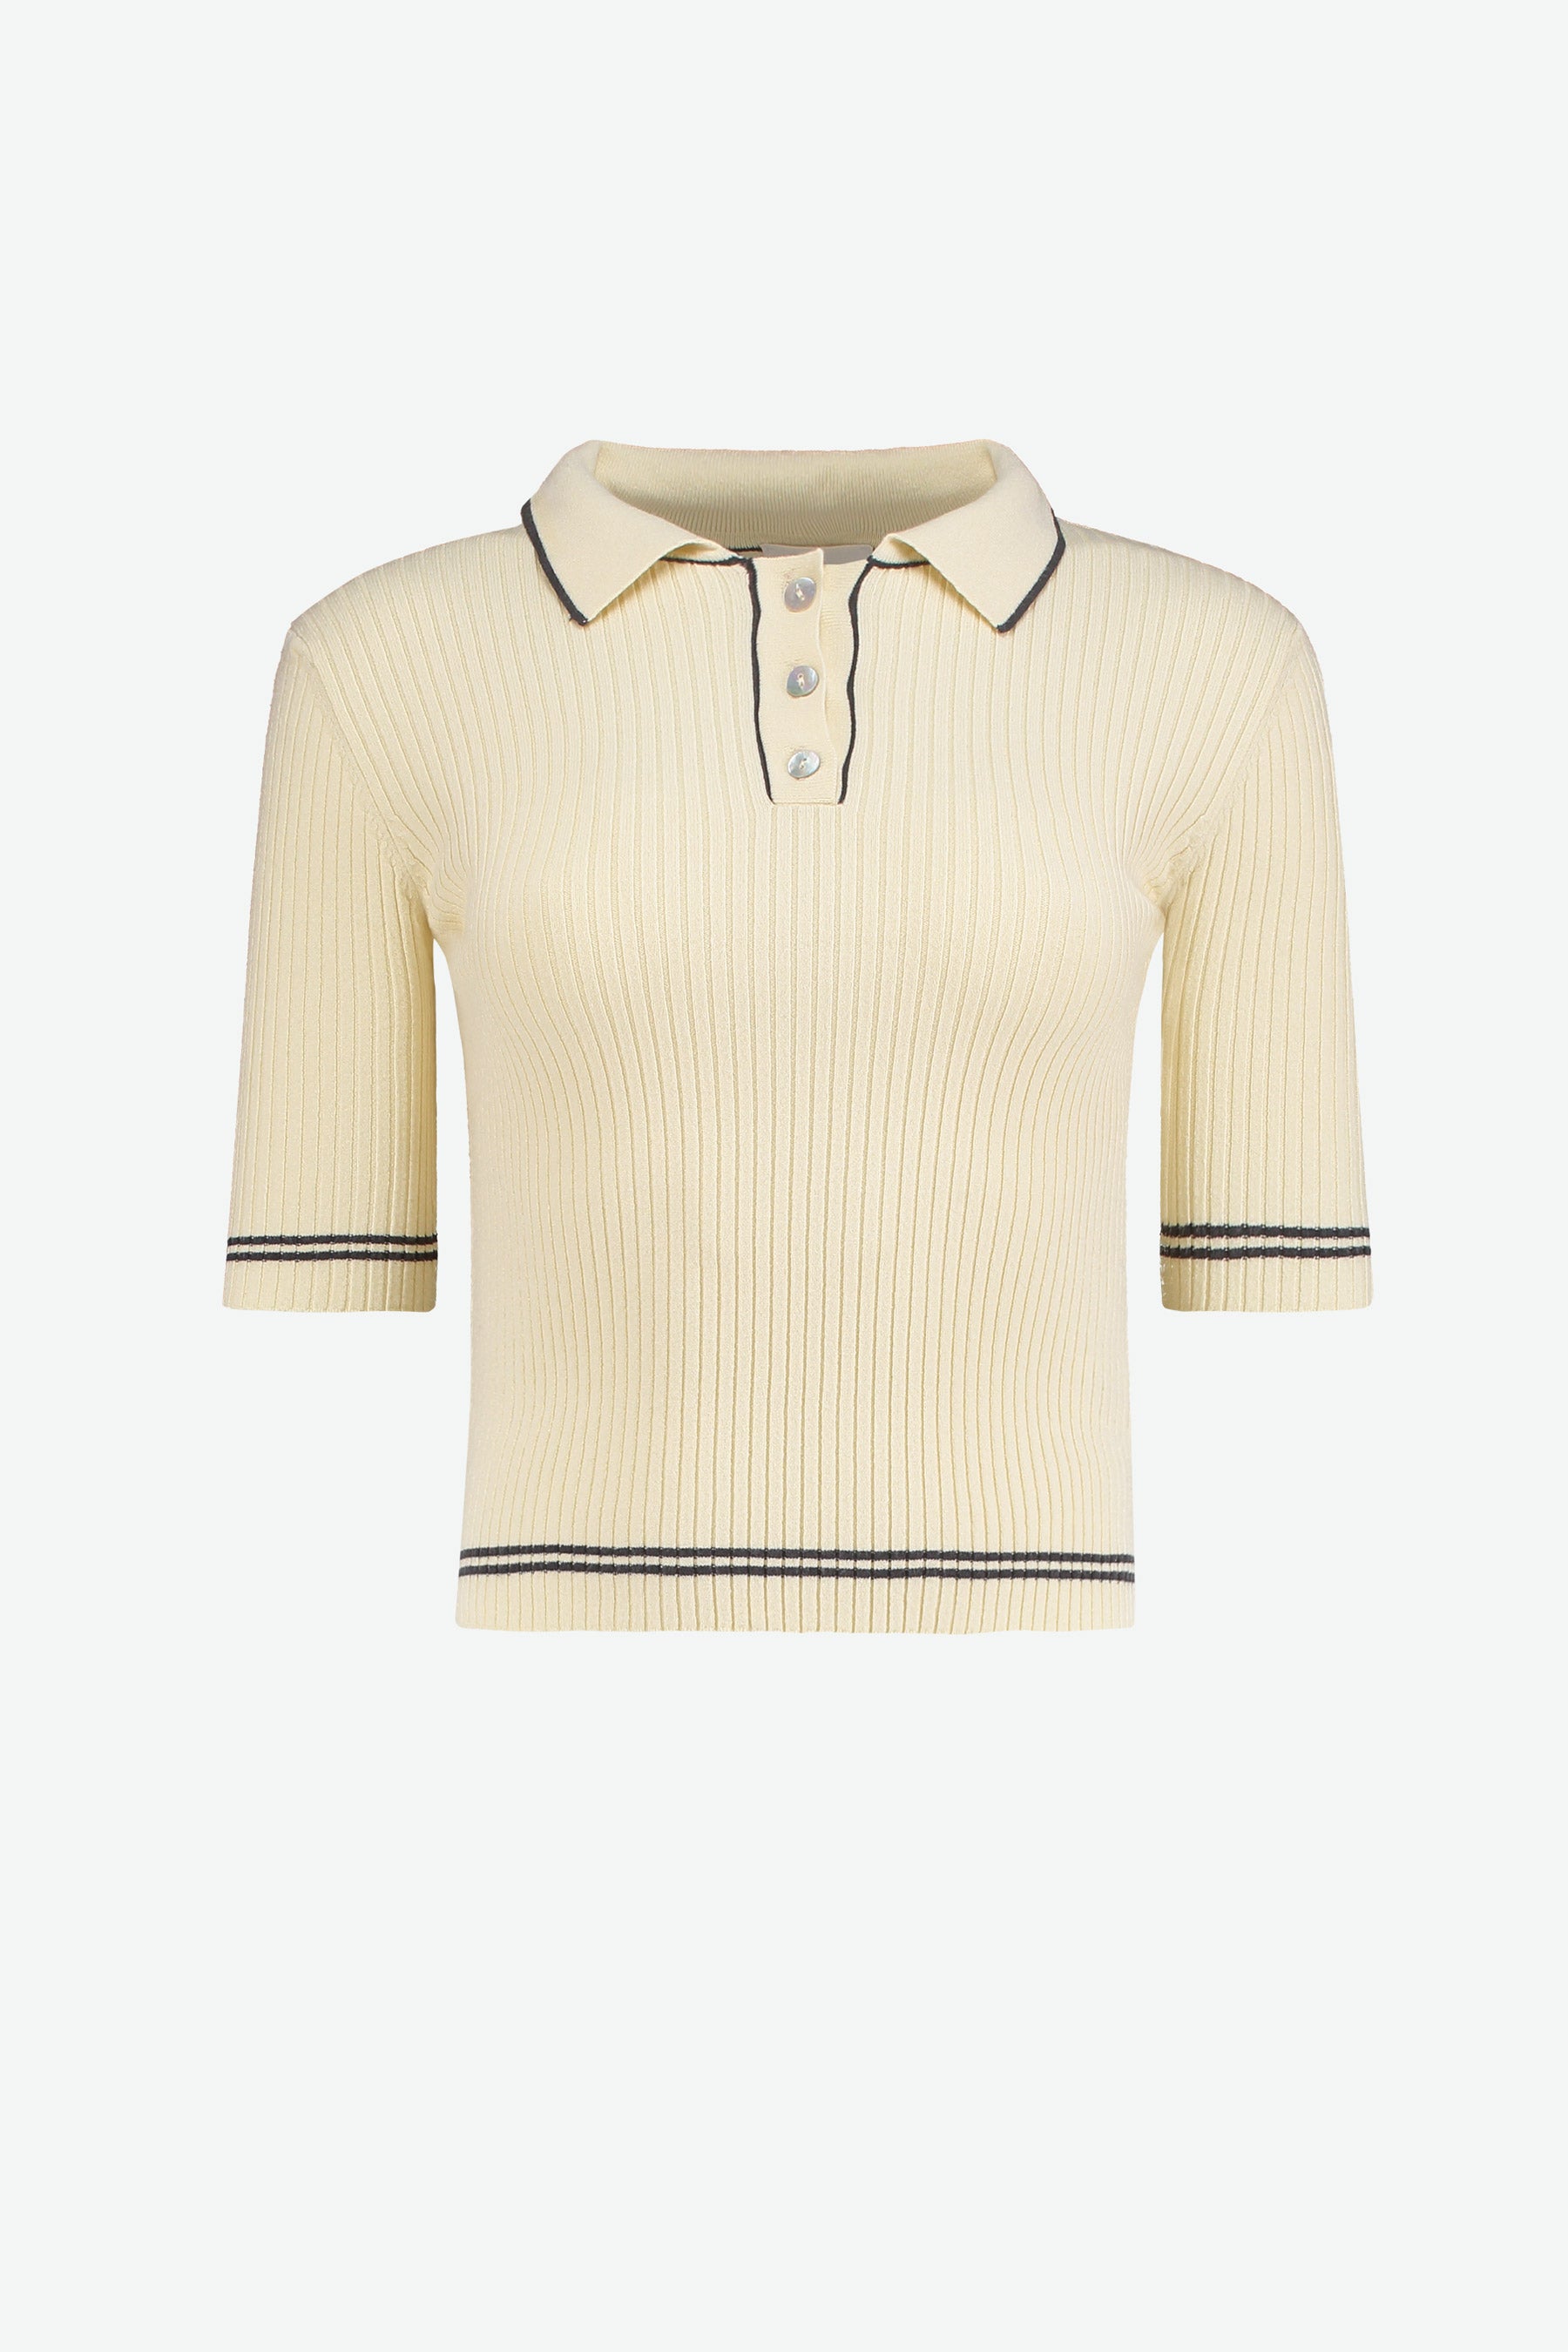 PRE ORDER – Amber Polo Shirt in Ivory